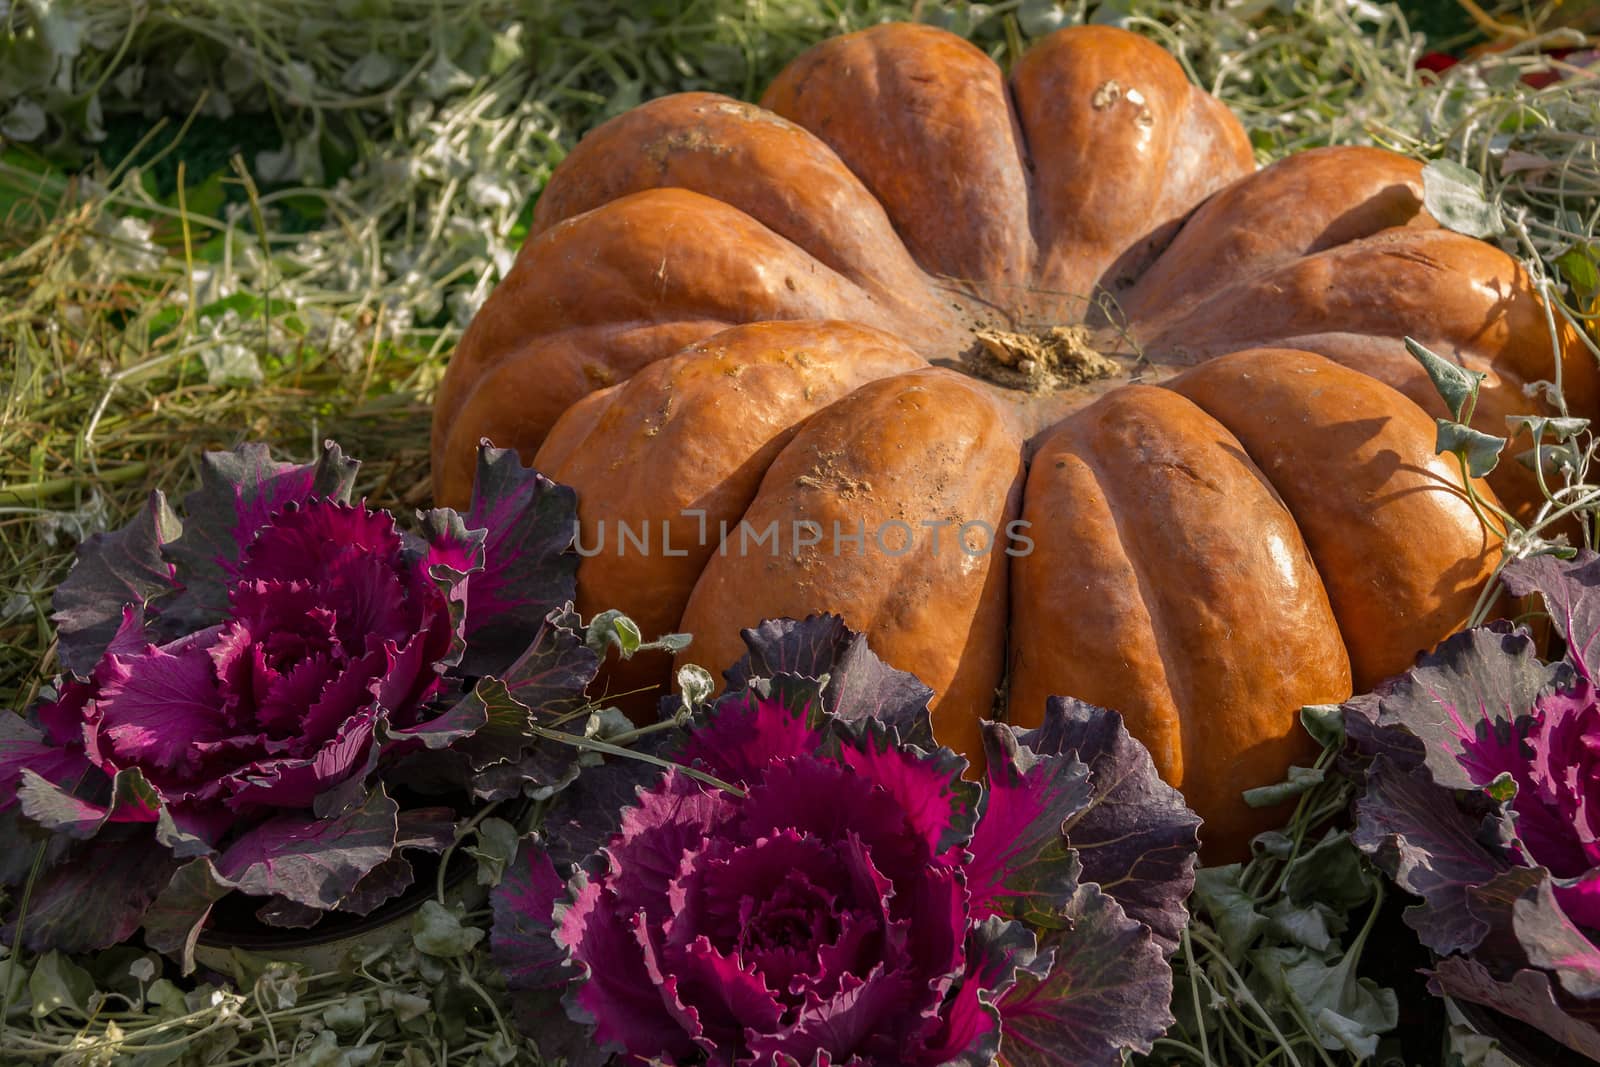 Pumpkin unusual shape and colors suitable to decorate the thanksgiving holiday